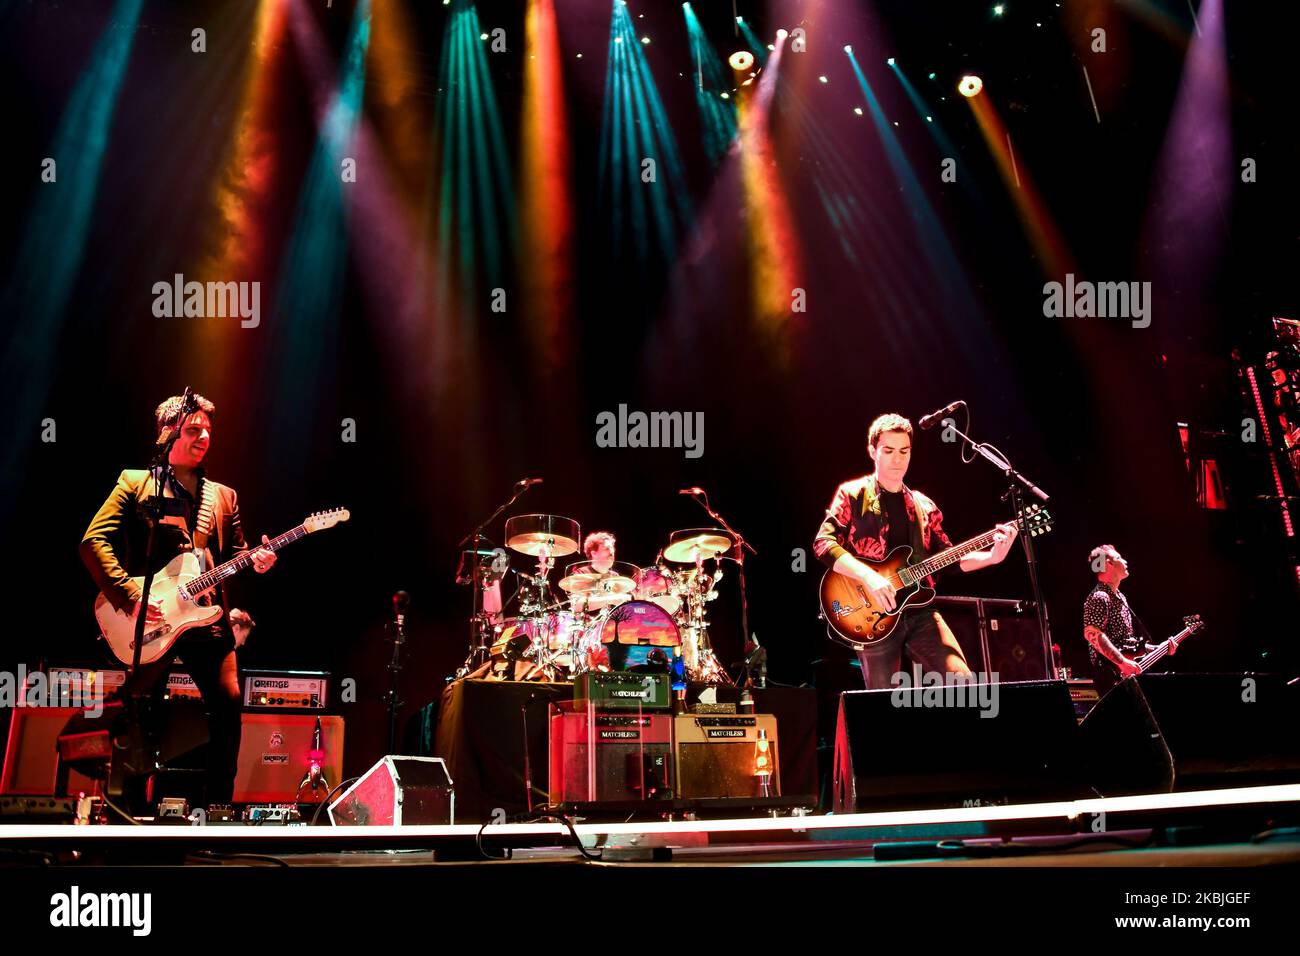 Welsh rock band Stereophonics perform on stage at the O2 Arena in London on March 6, 2020. The band consists of Kelly Jones (lead vocals, lead guitar, keyboards), Richard Jones (bass guitar, piano, backing vocals), Adam Zindani (rhythm guitar, backing vocals), Jamie Morrison (drums, percussion). (Photo by Alberto Pezzali/NurPhoto) Stock Photo